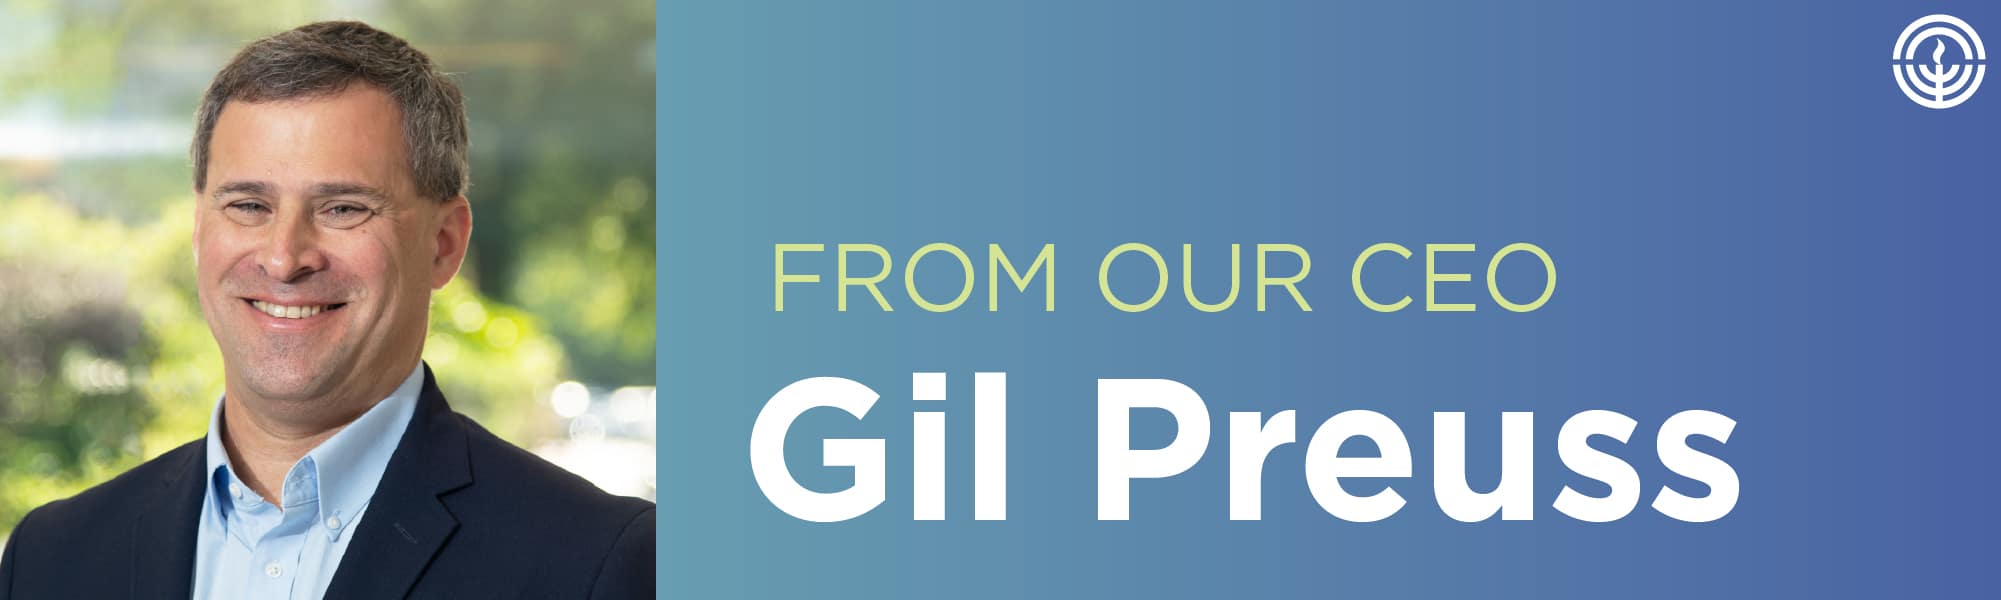 A Thanksgiving Message from Our CEO, Gil Preuss